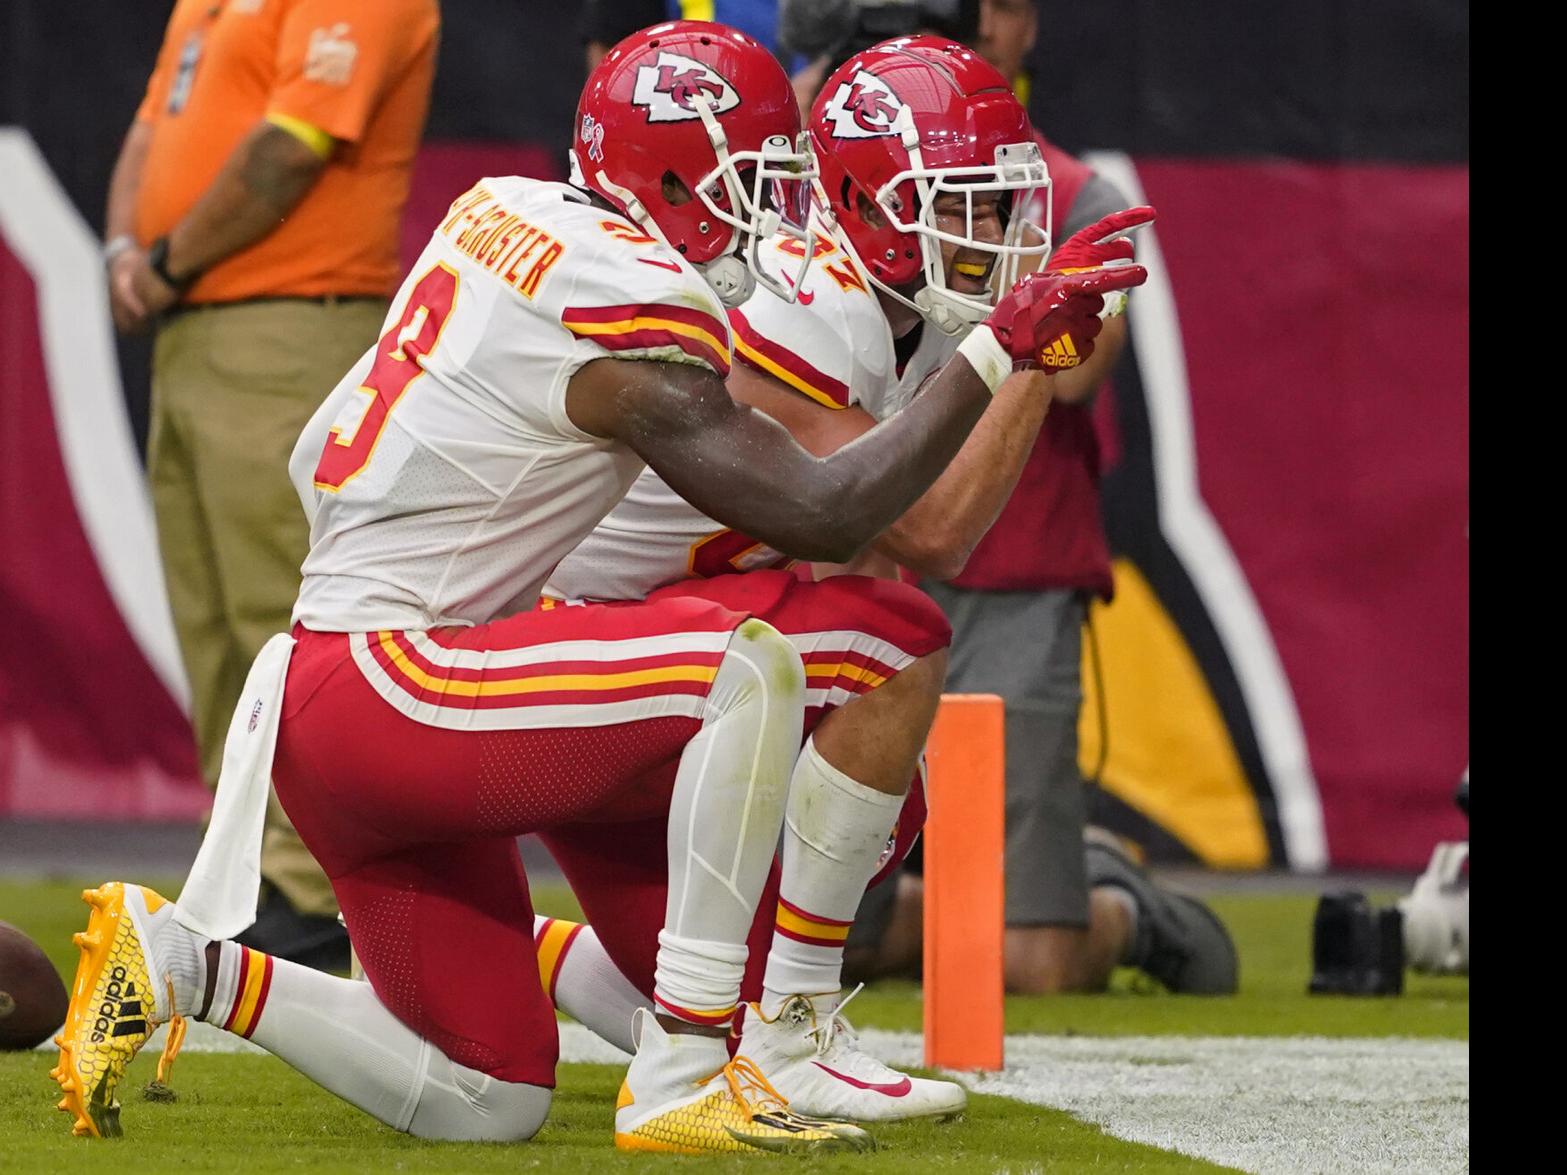 Chargers vs. Chiefs Week 2 prop picks: Back Juju Smith-Schuster on